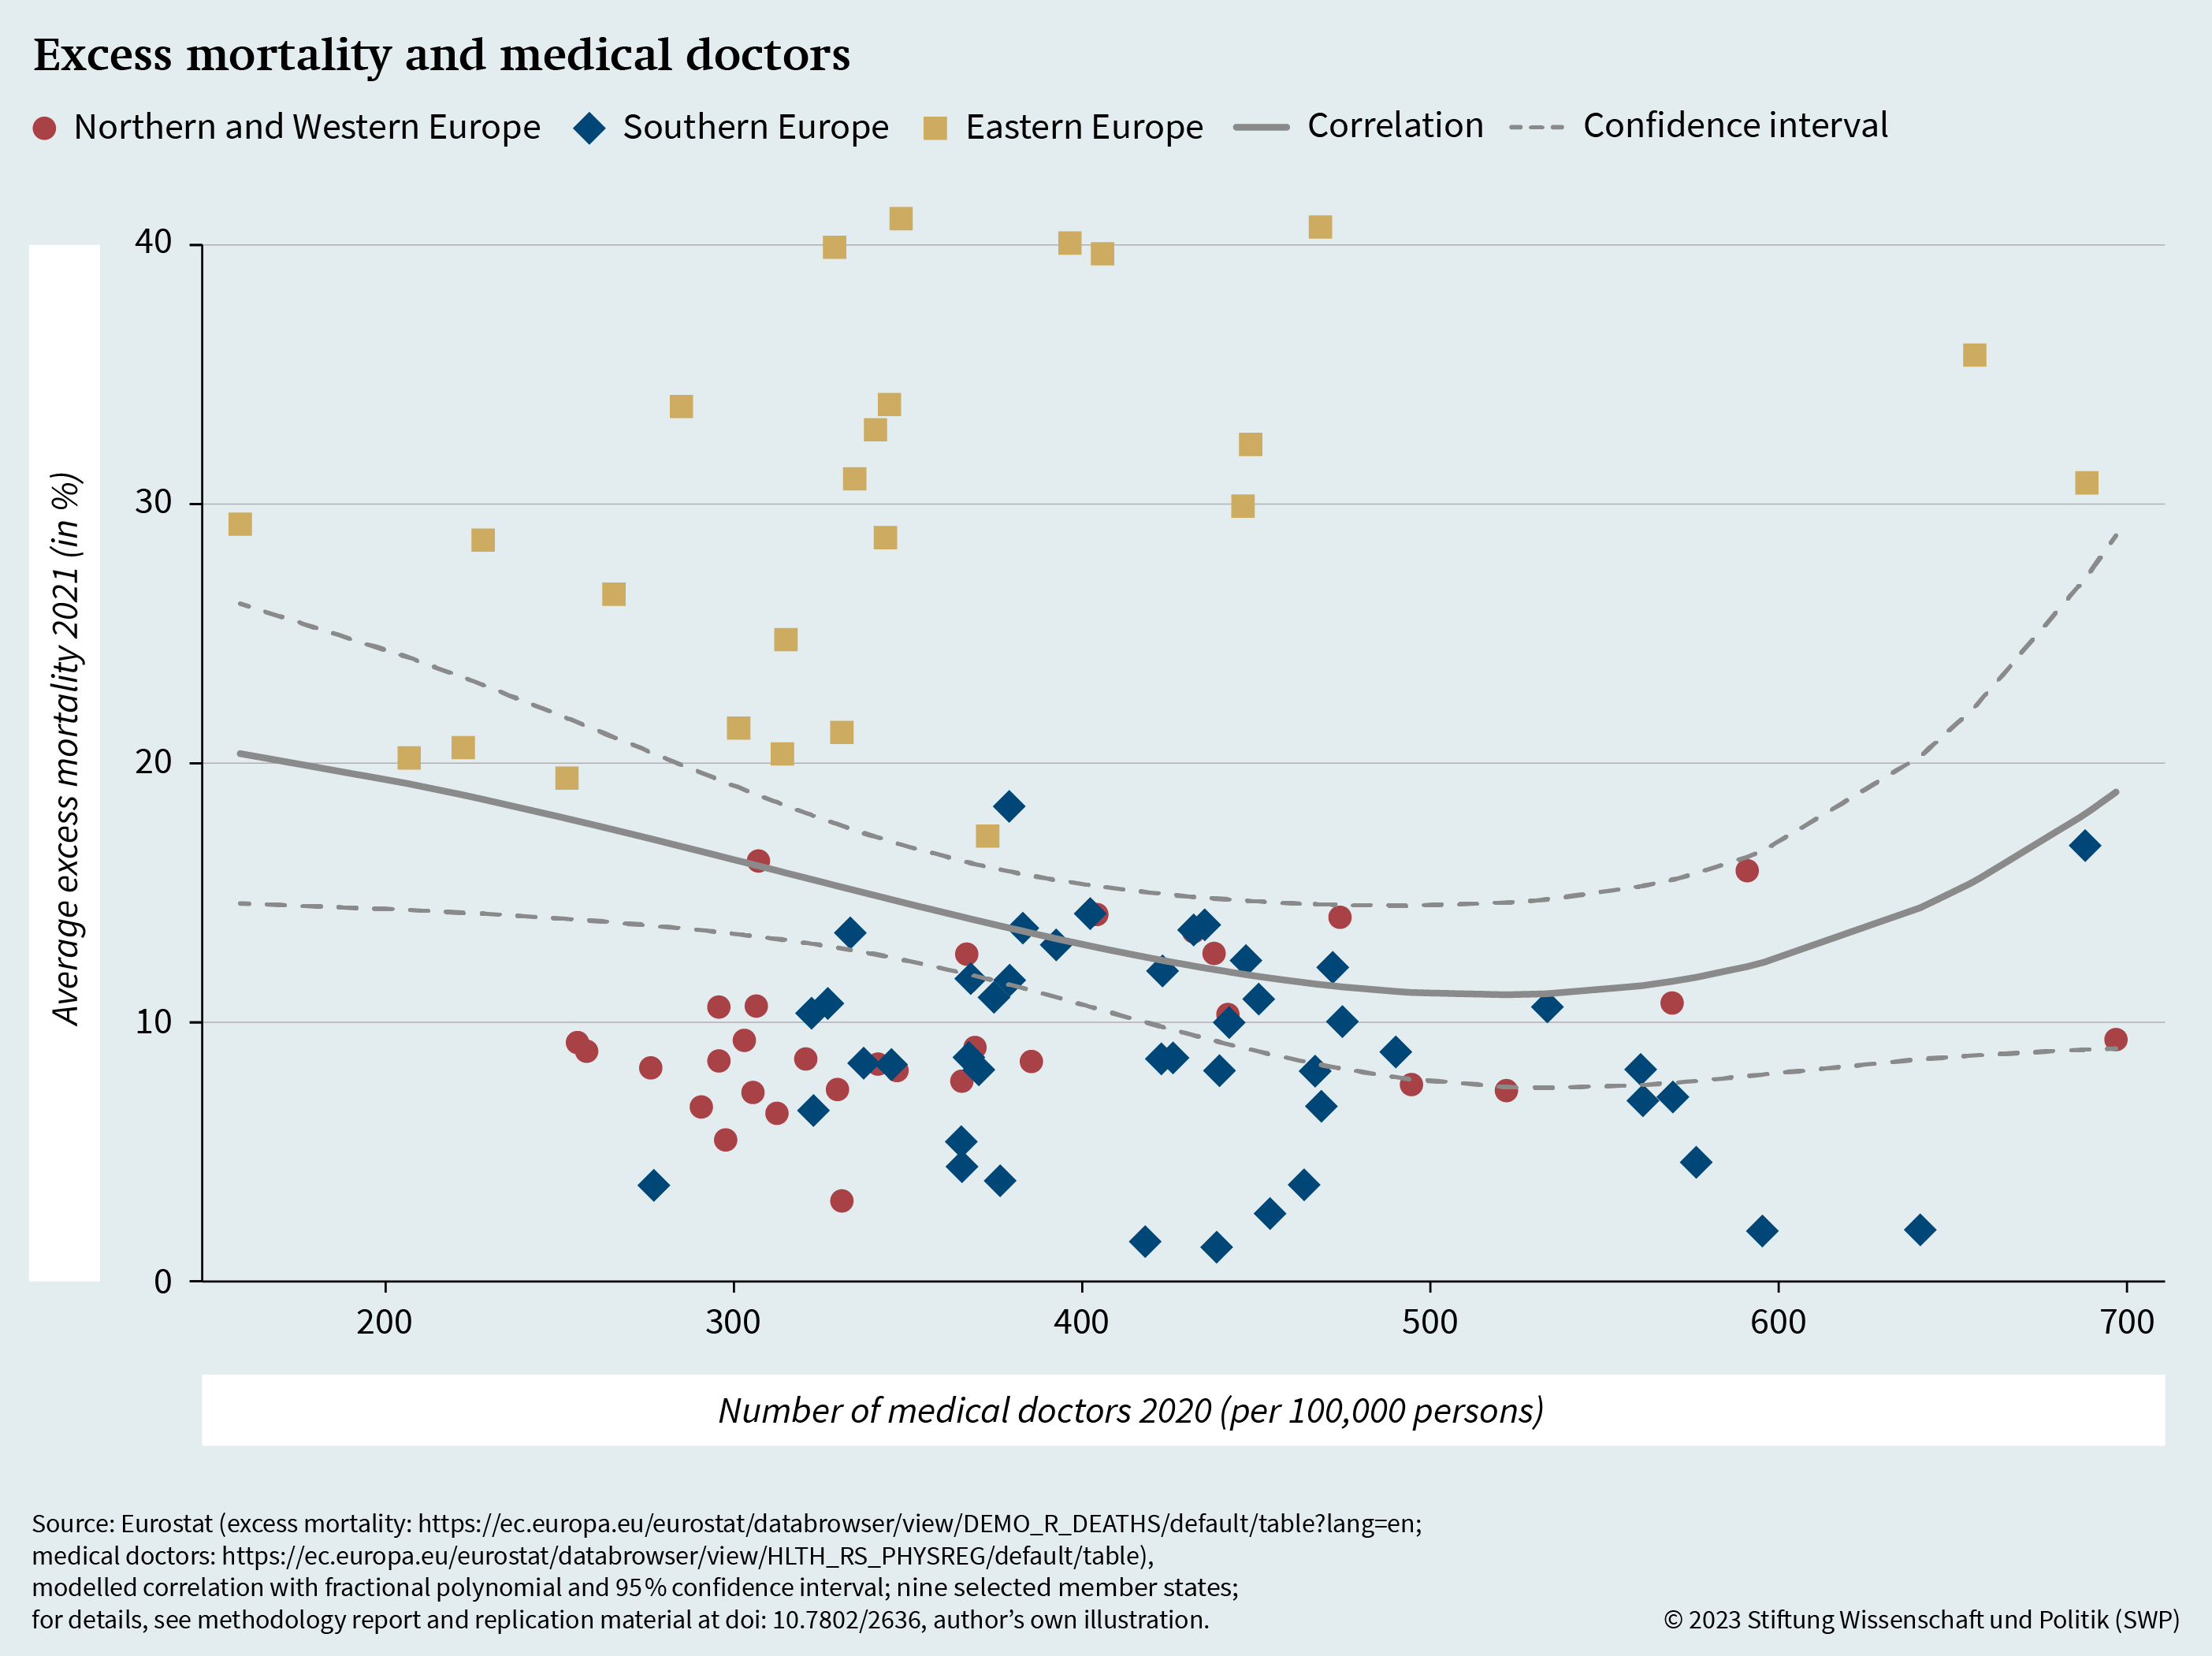 Figure A.1: Excess mortality and medical doctors